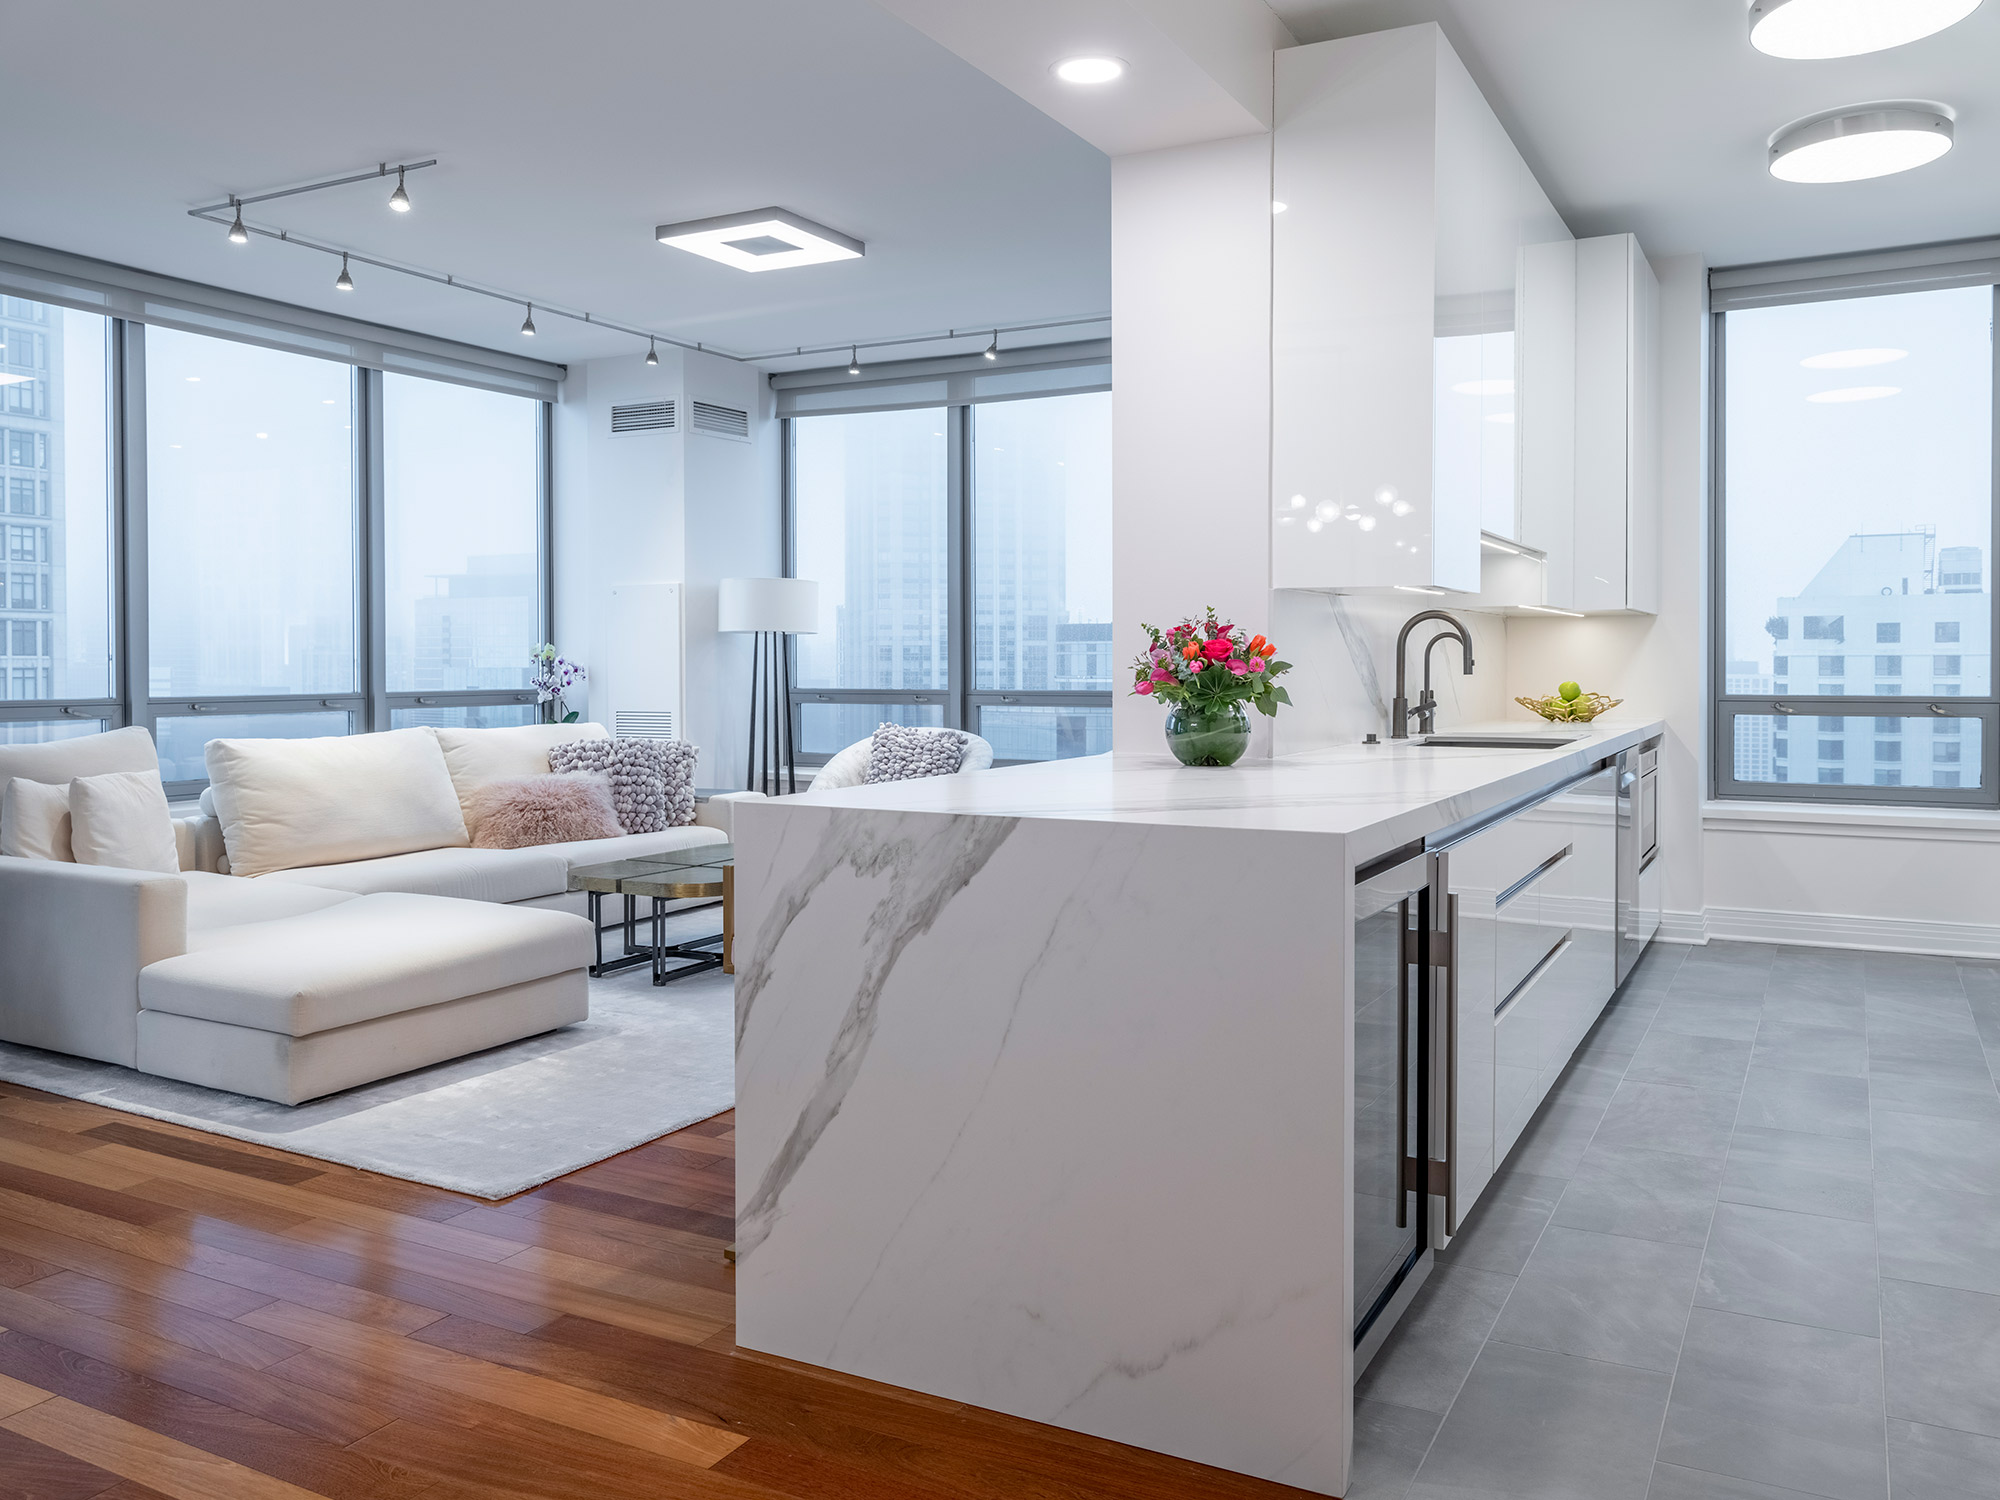 Image of Lake Shore Drive 8 in {{Dekton Opera brings timeless and natural design to this Chicago home }} - Cosentino